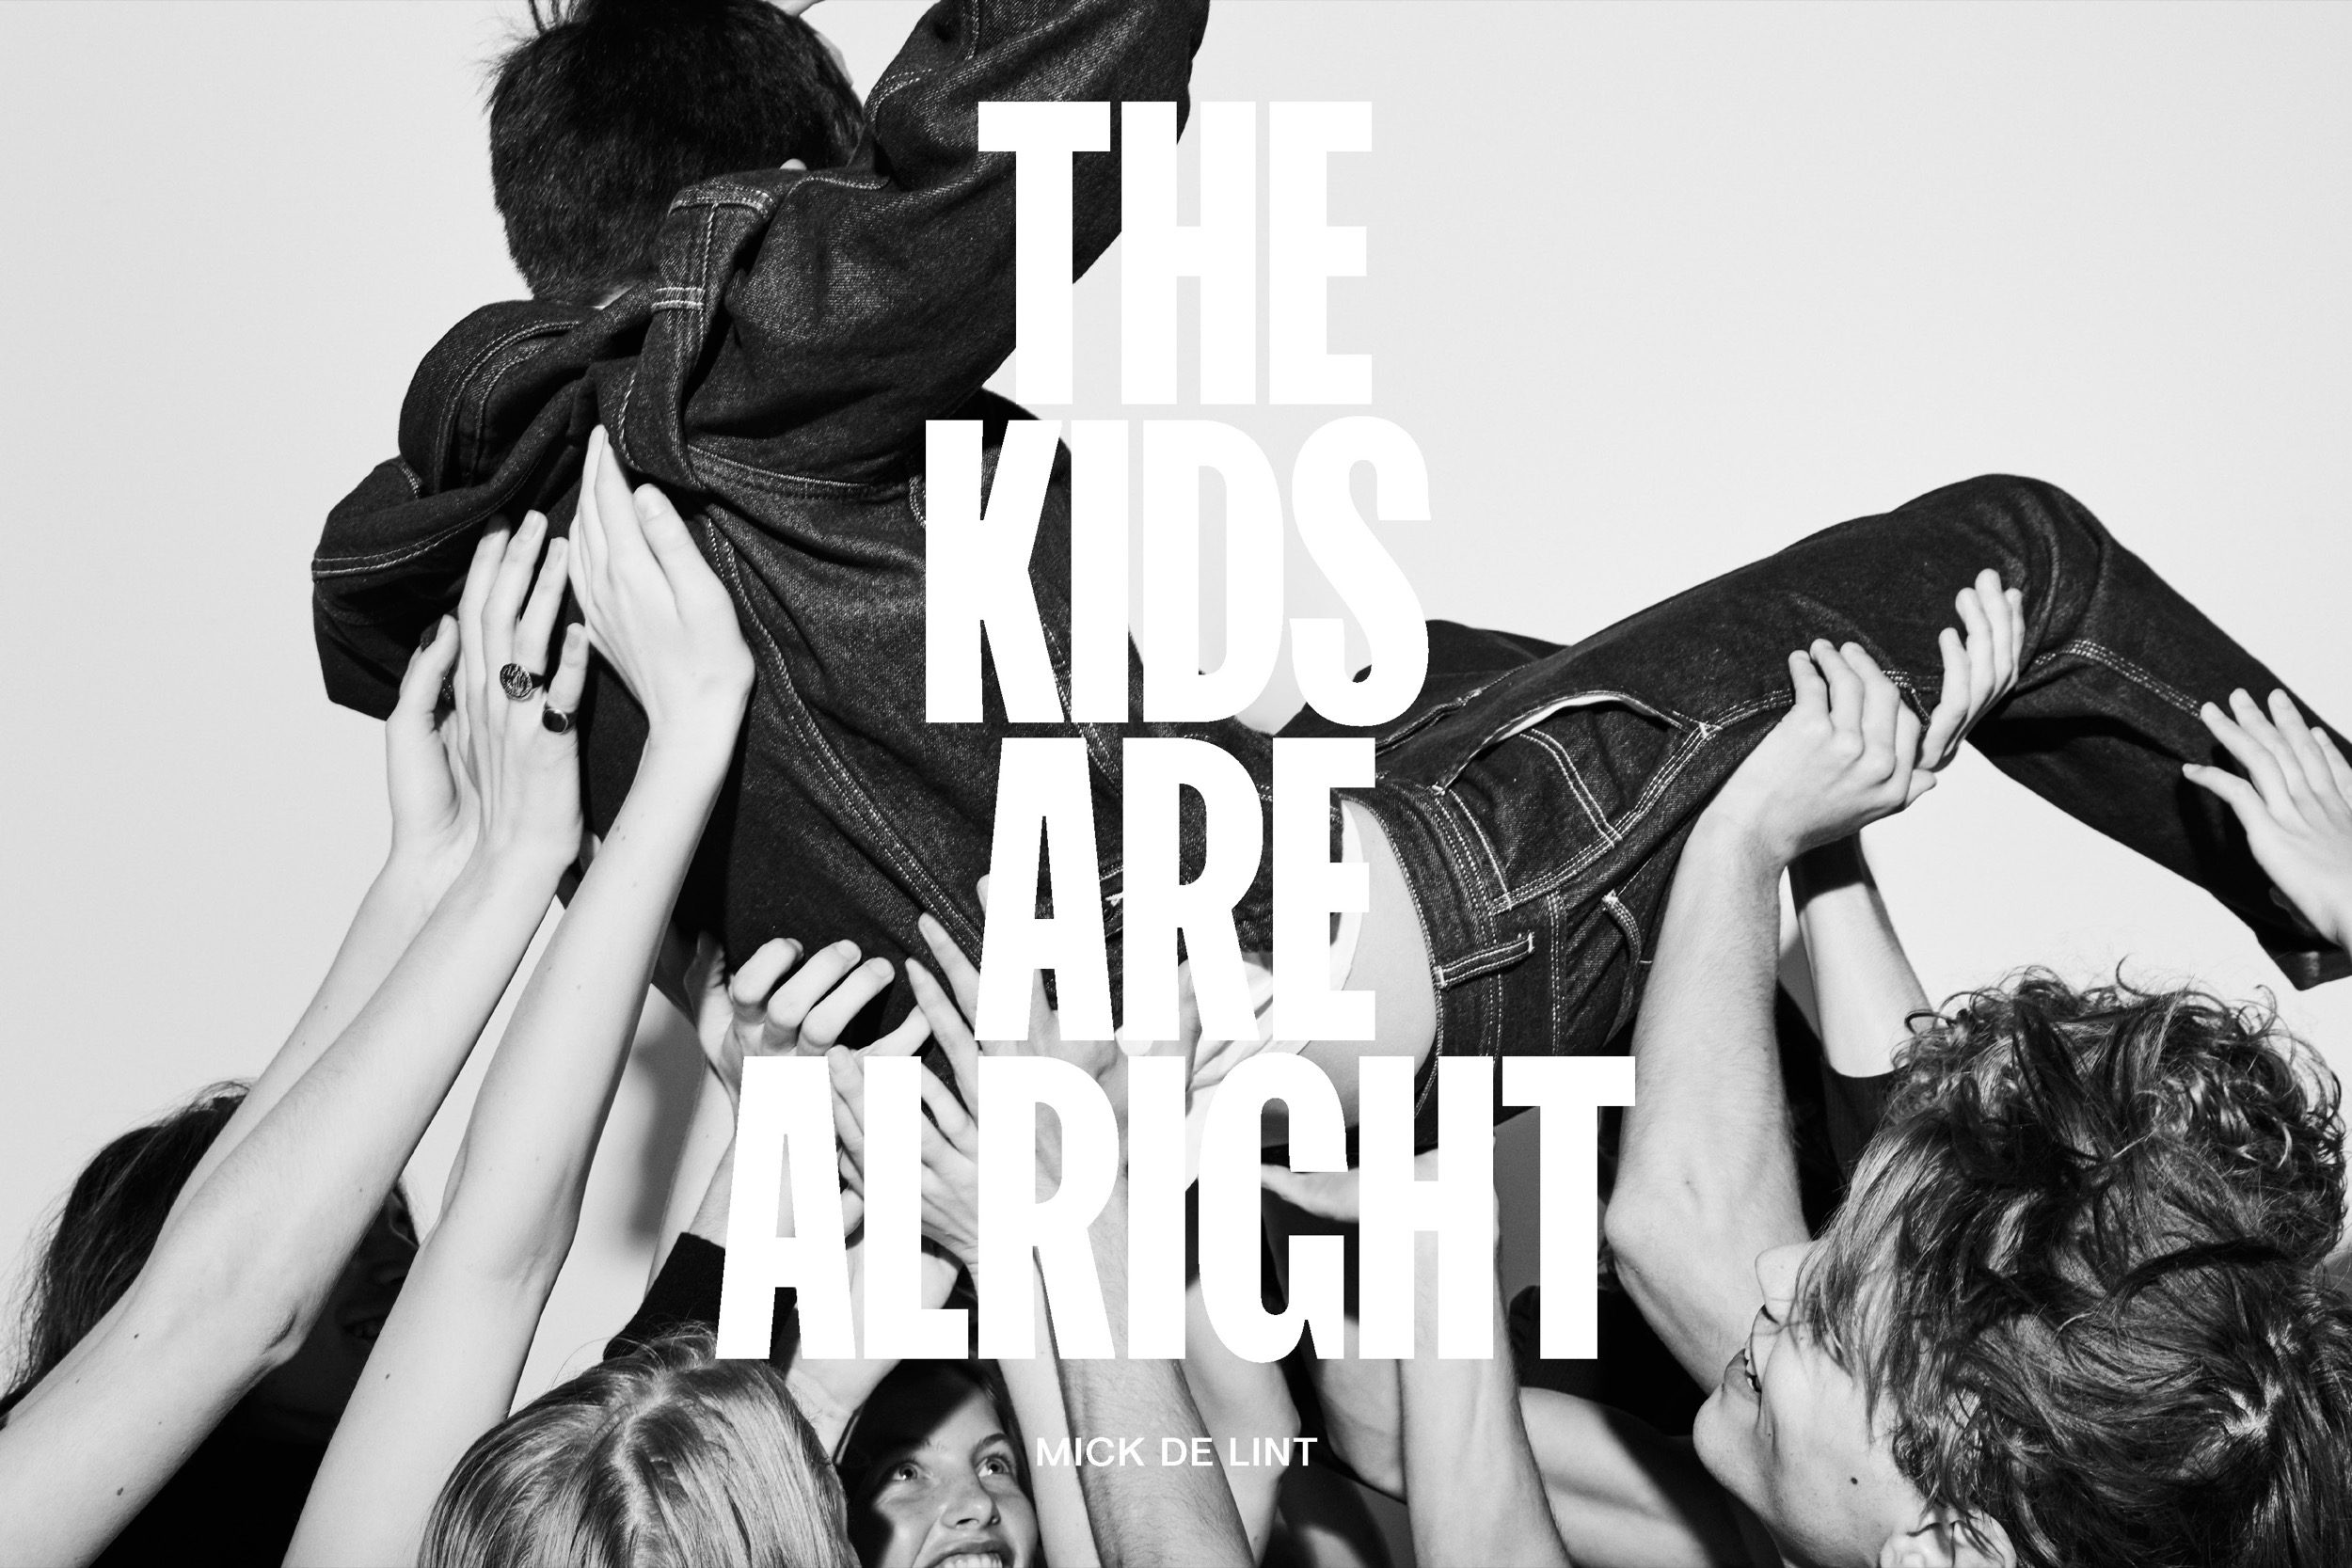 kathrin-hohberg-the-kids-are-alright-mick-de-lint-01